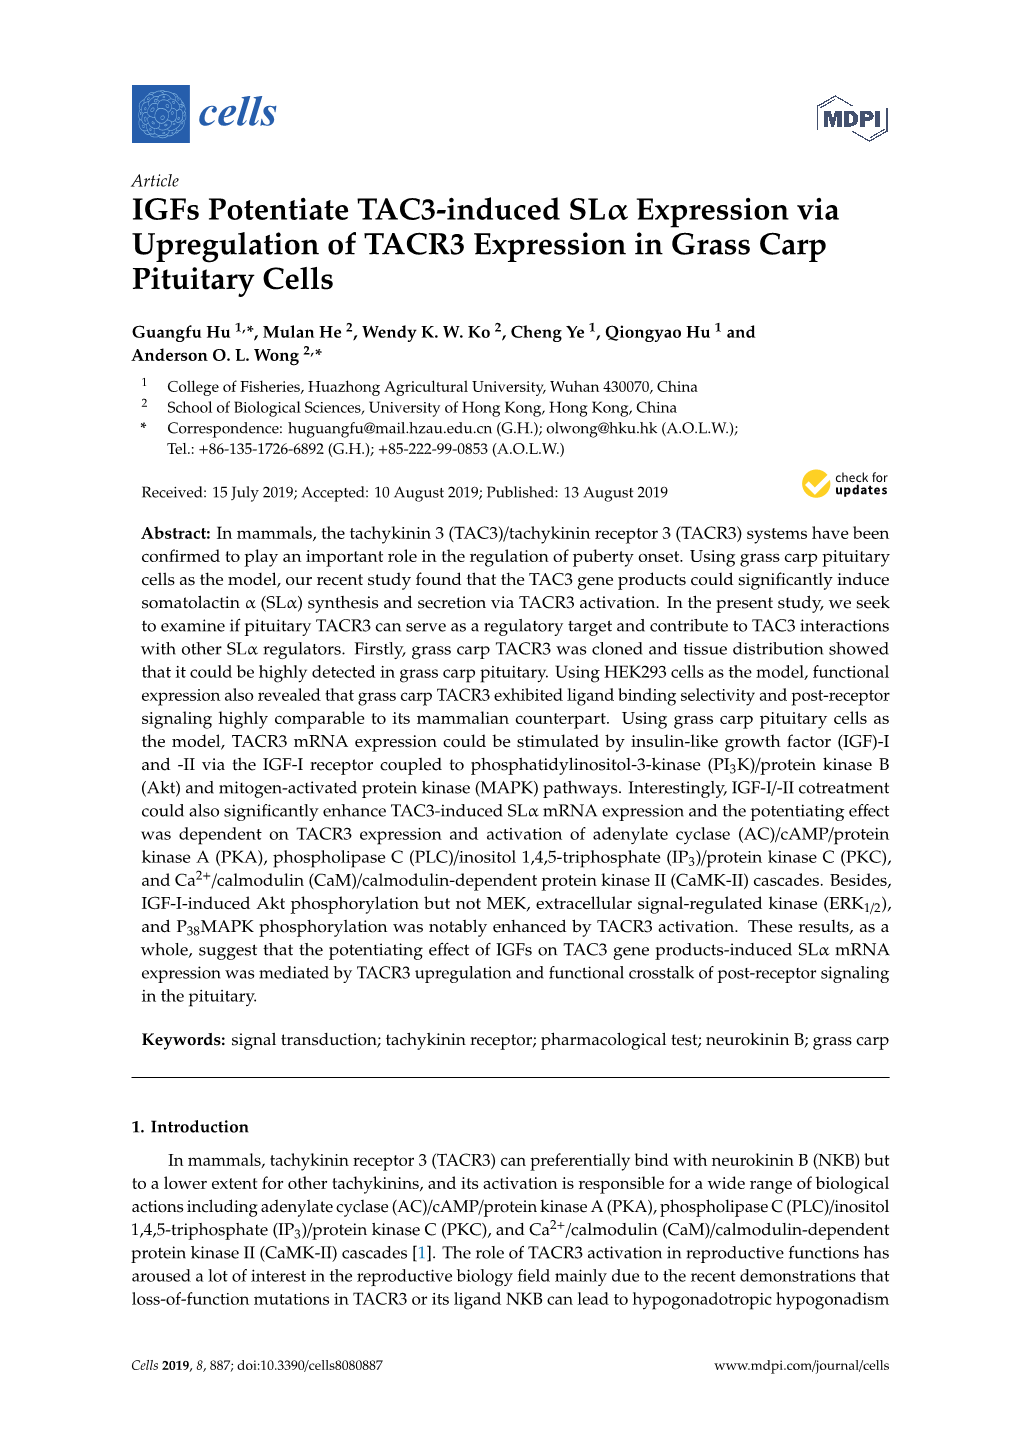 Igfs Potentiate TAC3-Induced Slα Expression Via Upregulation of TACR3 Expression in Grass Carp Pituitary Cells